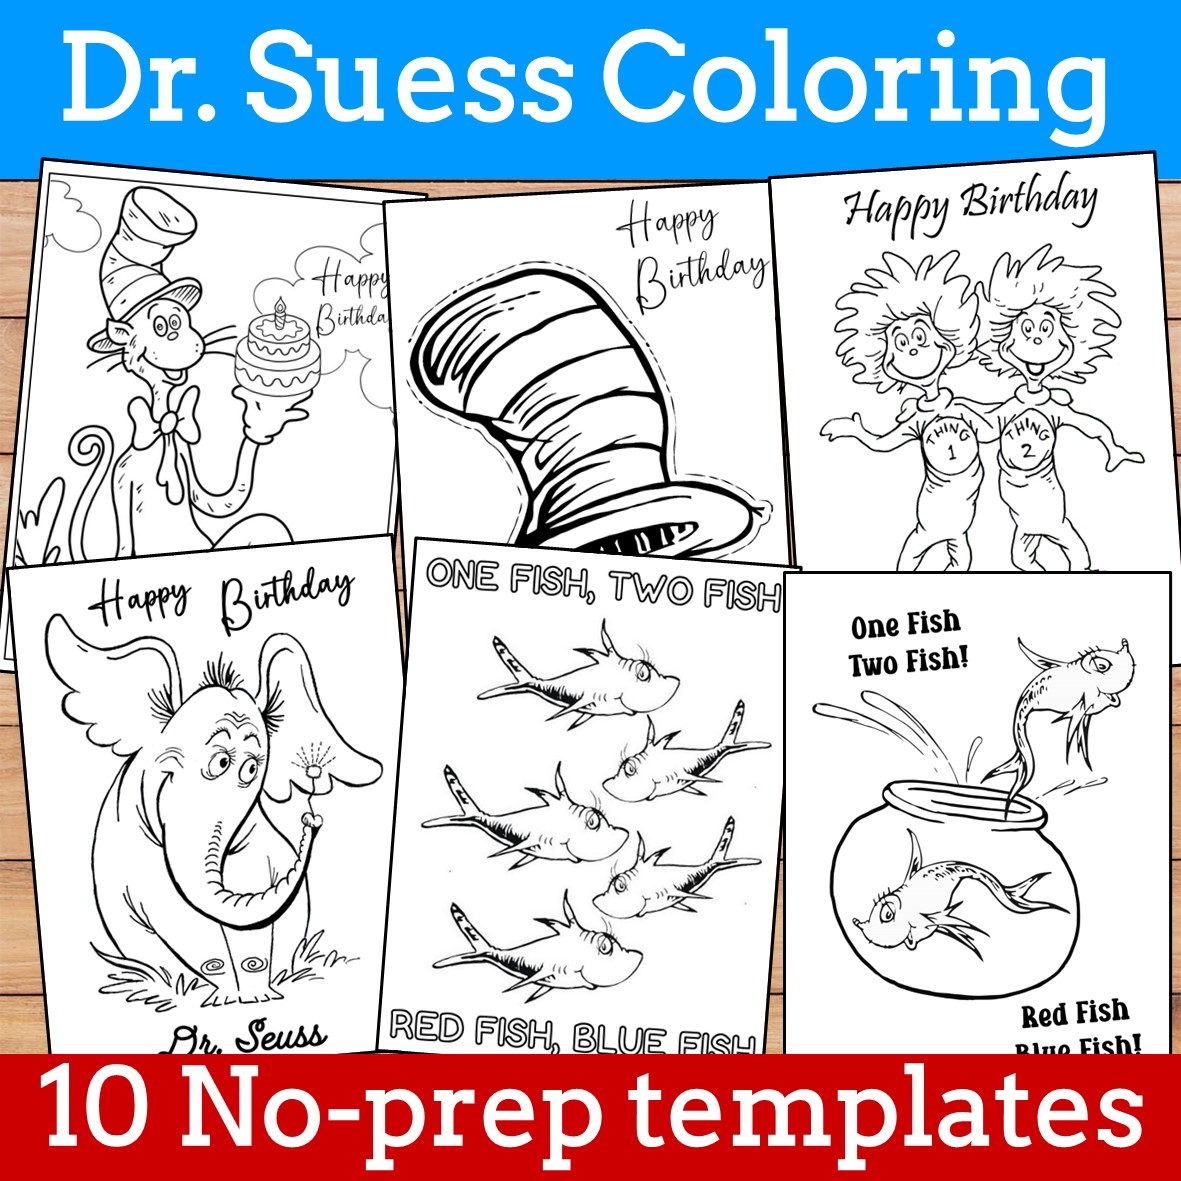 Dr. Seuss Coloring Pages for Read Across America Day - Printable Educational Activities